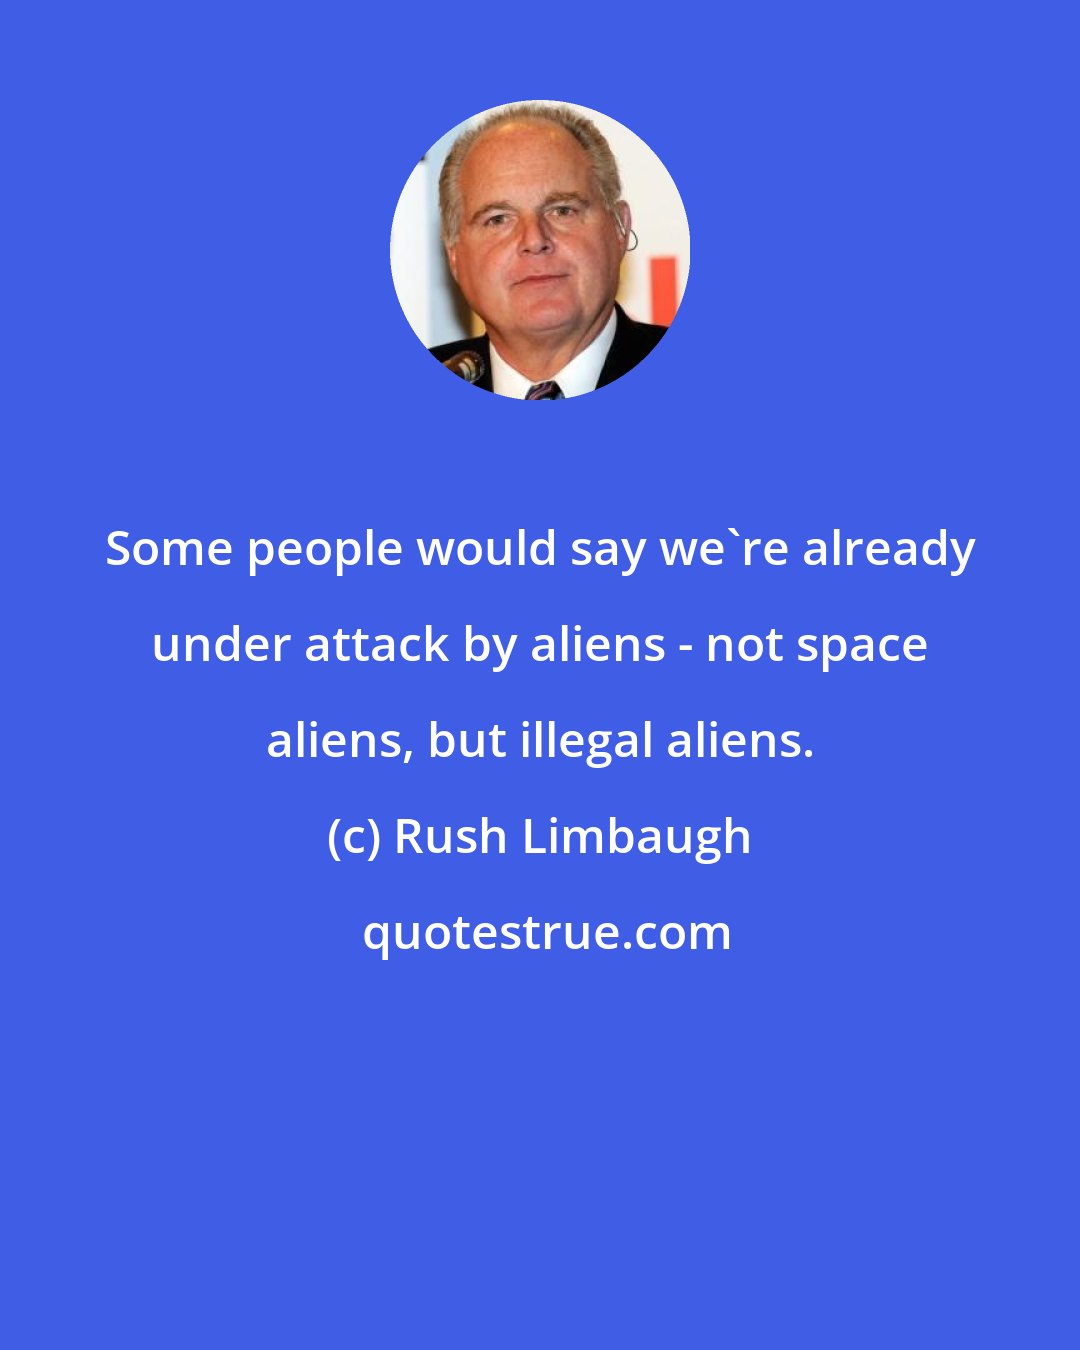 Rush Limbaugh: Some people would say we're already under attack by aliens - not space aliens, but illegal aliens.